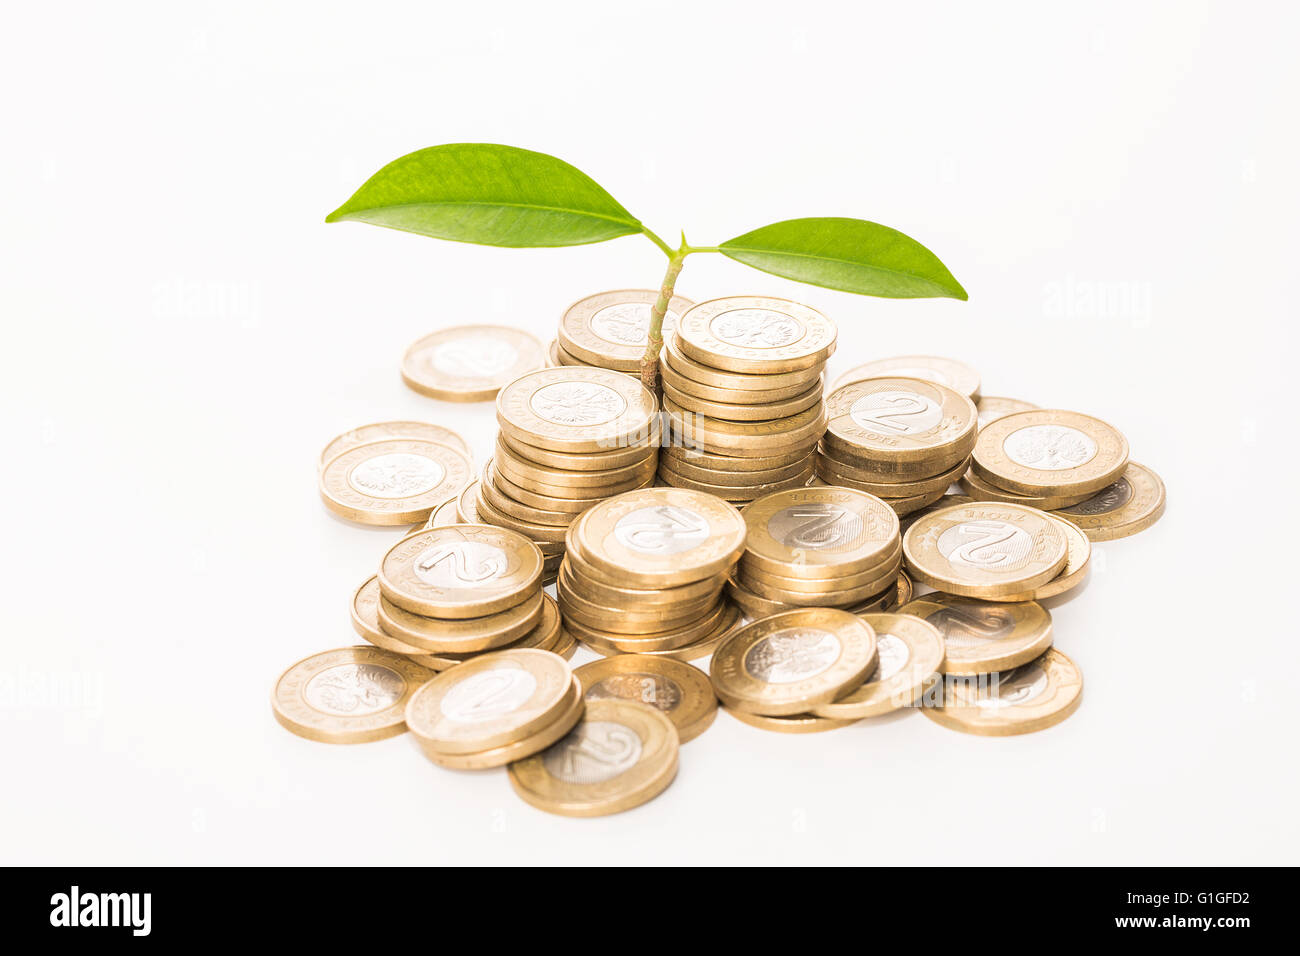 Money concept. Plant growing on coins. Stock Photo